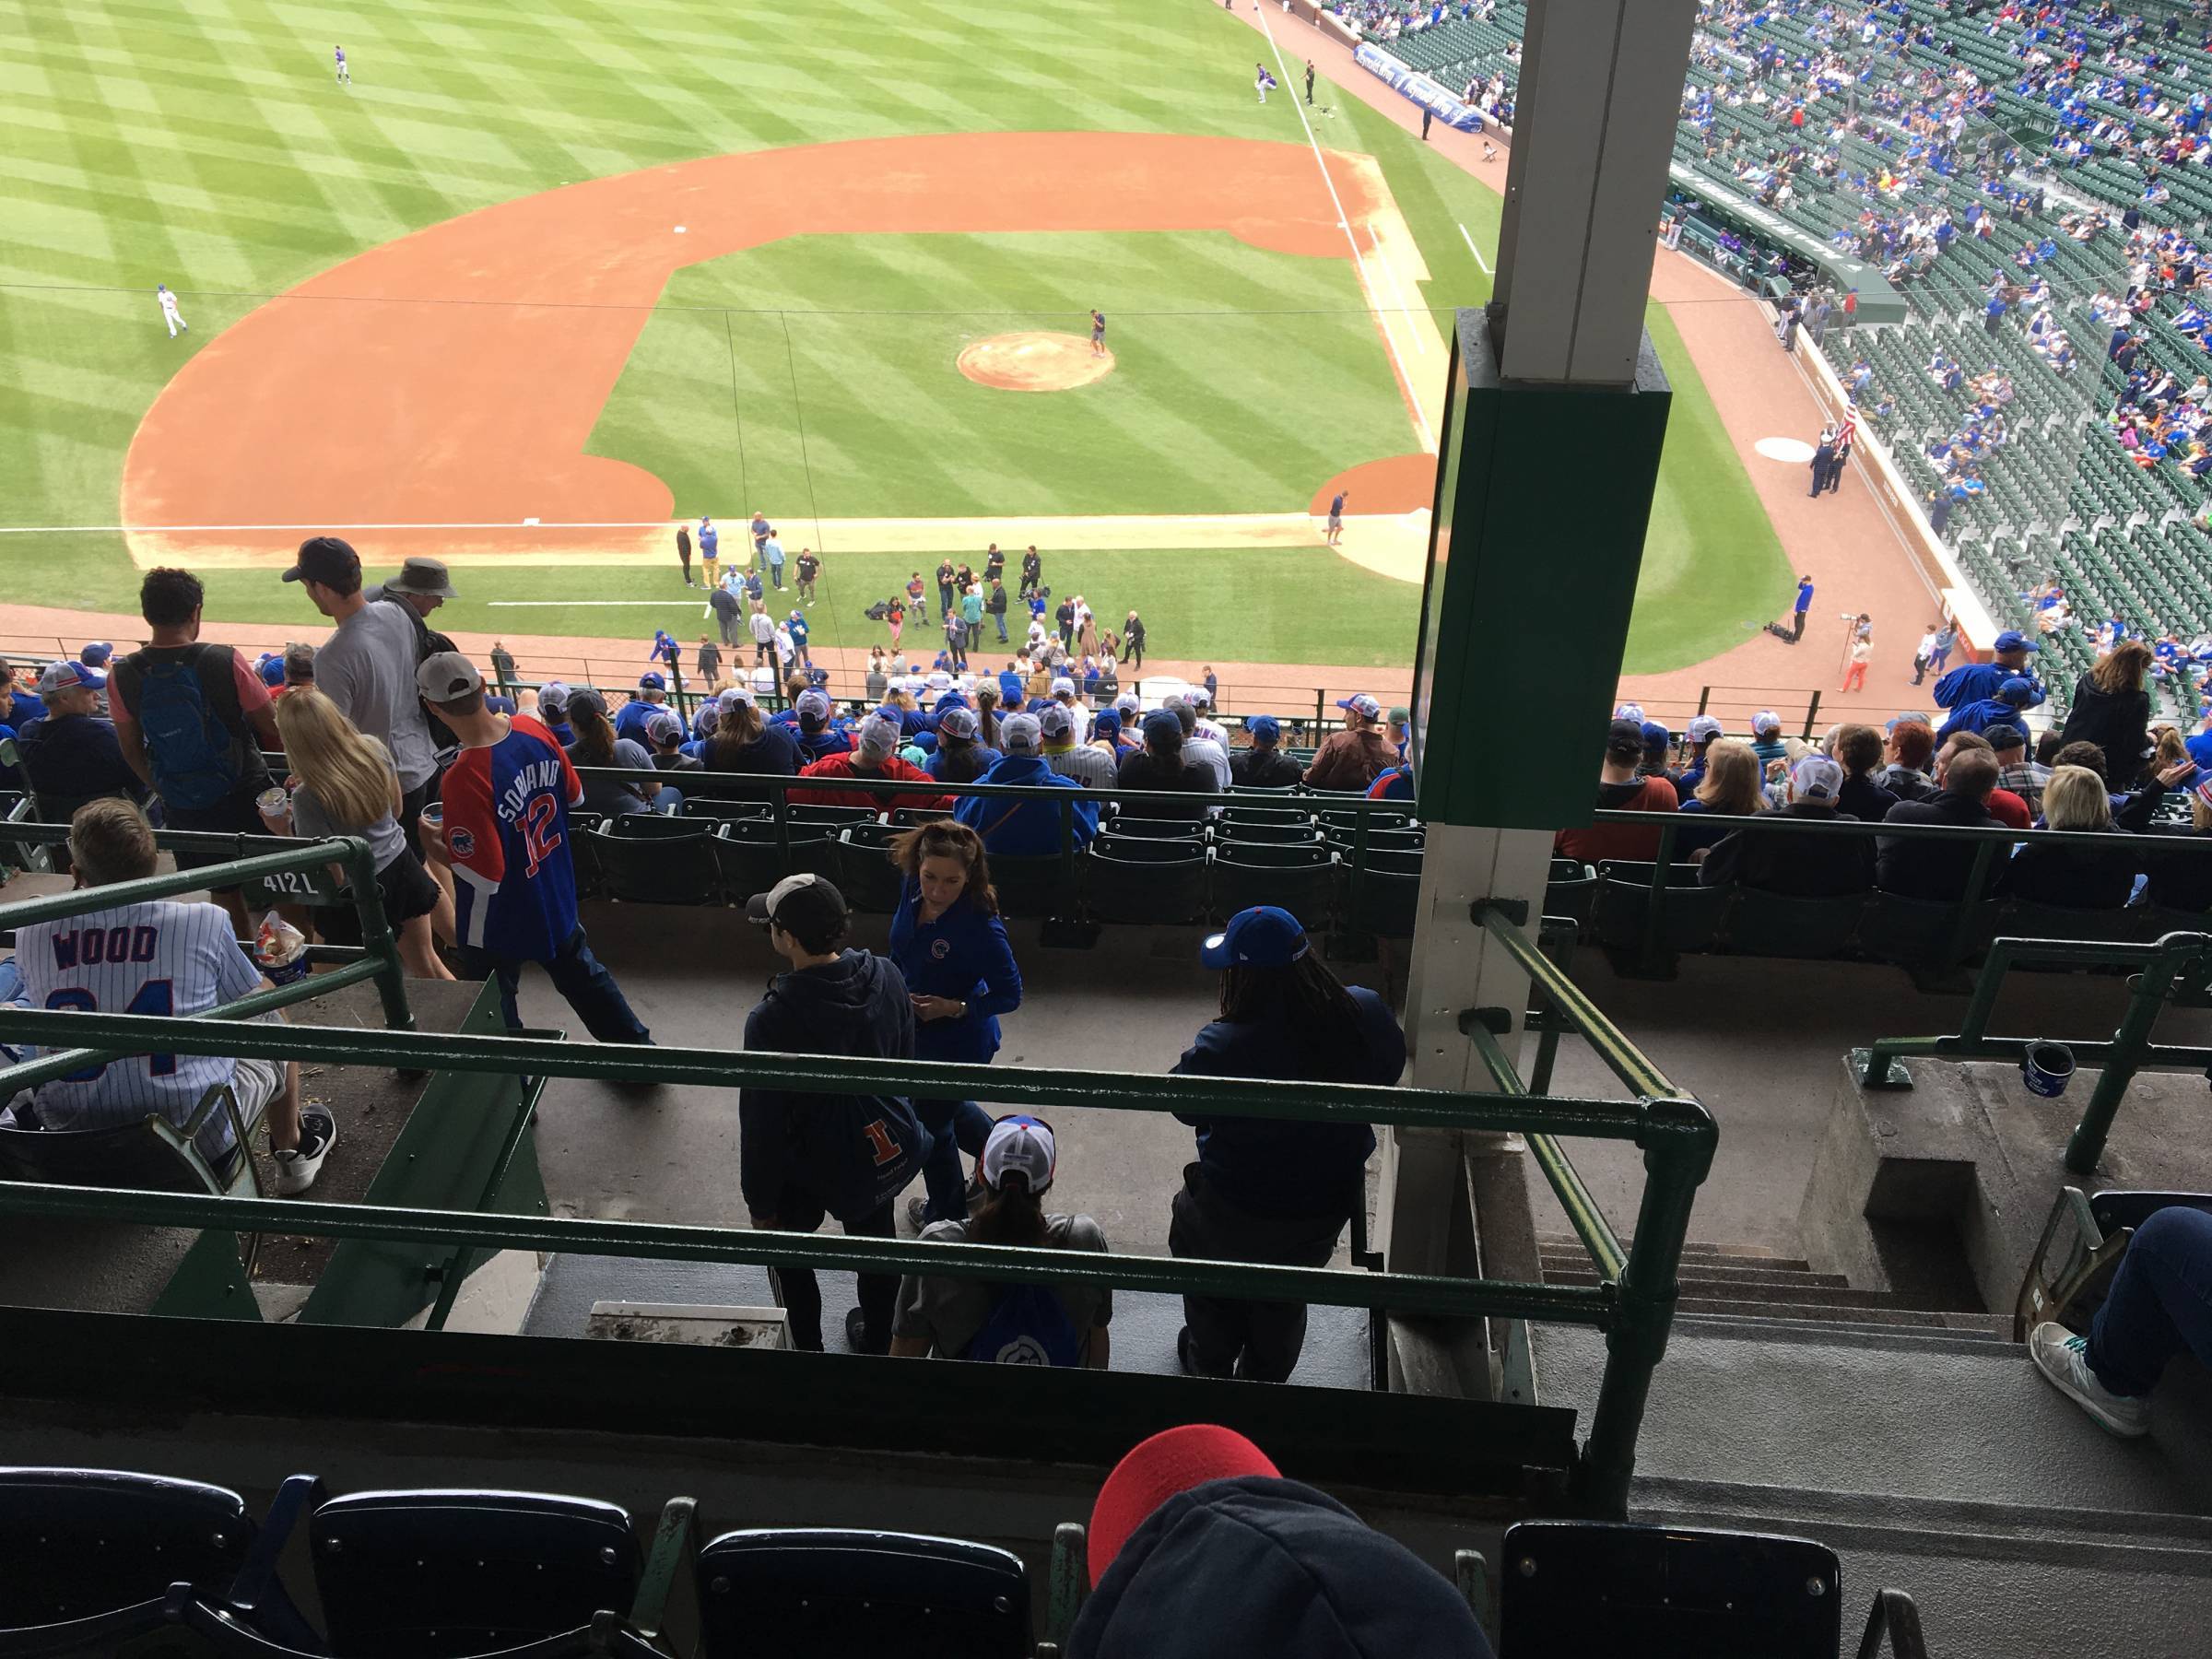 Pole in Section 412L at Wrigley Field